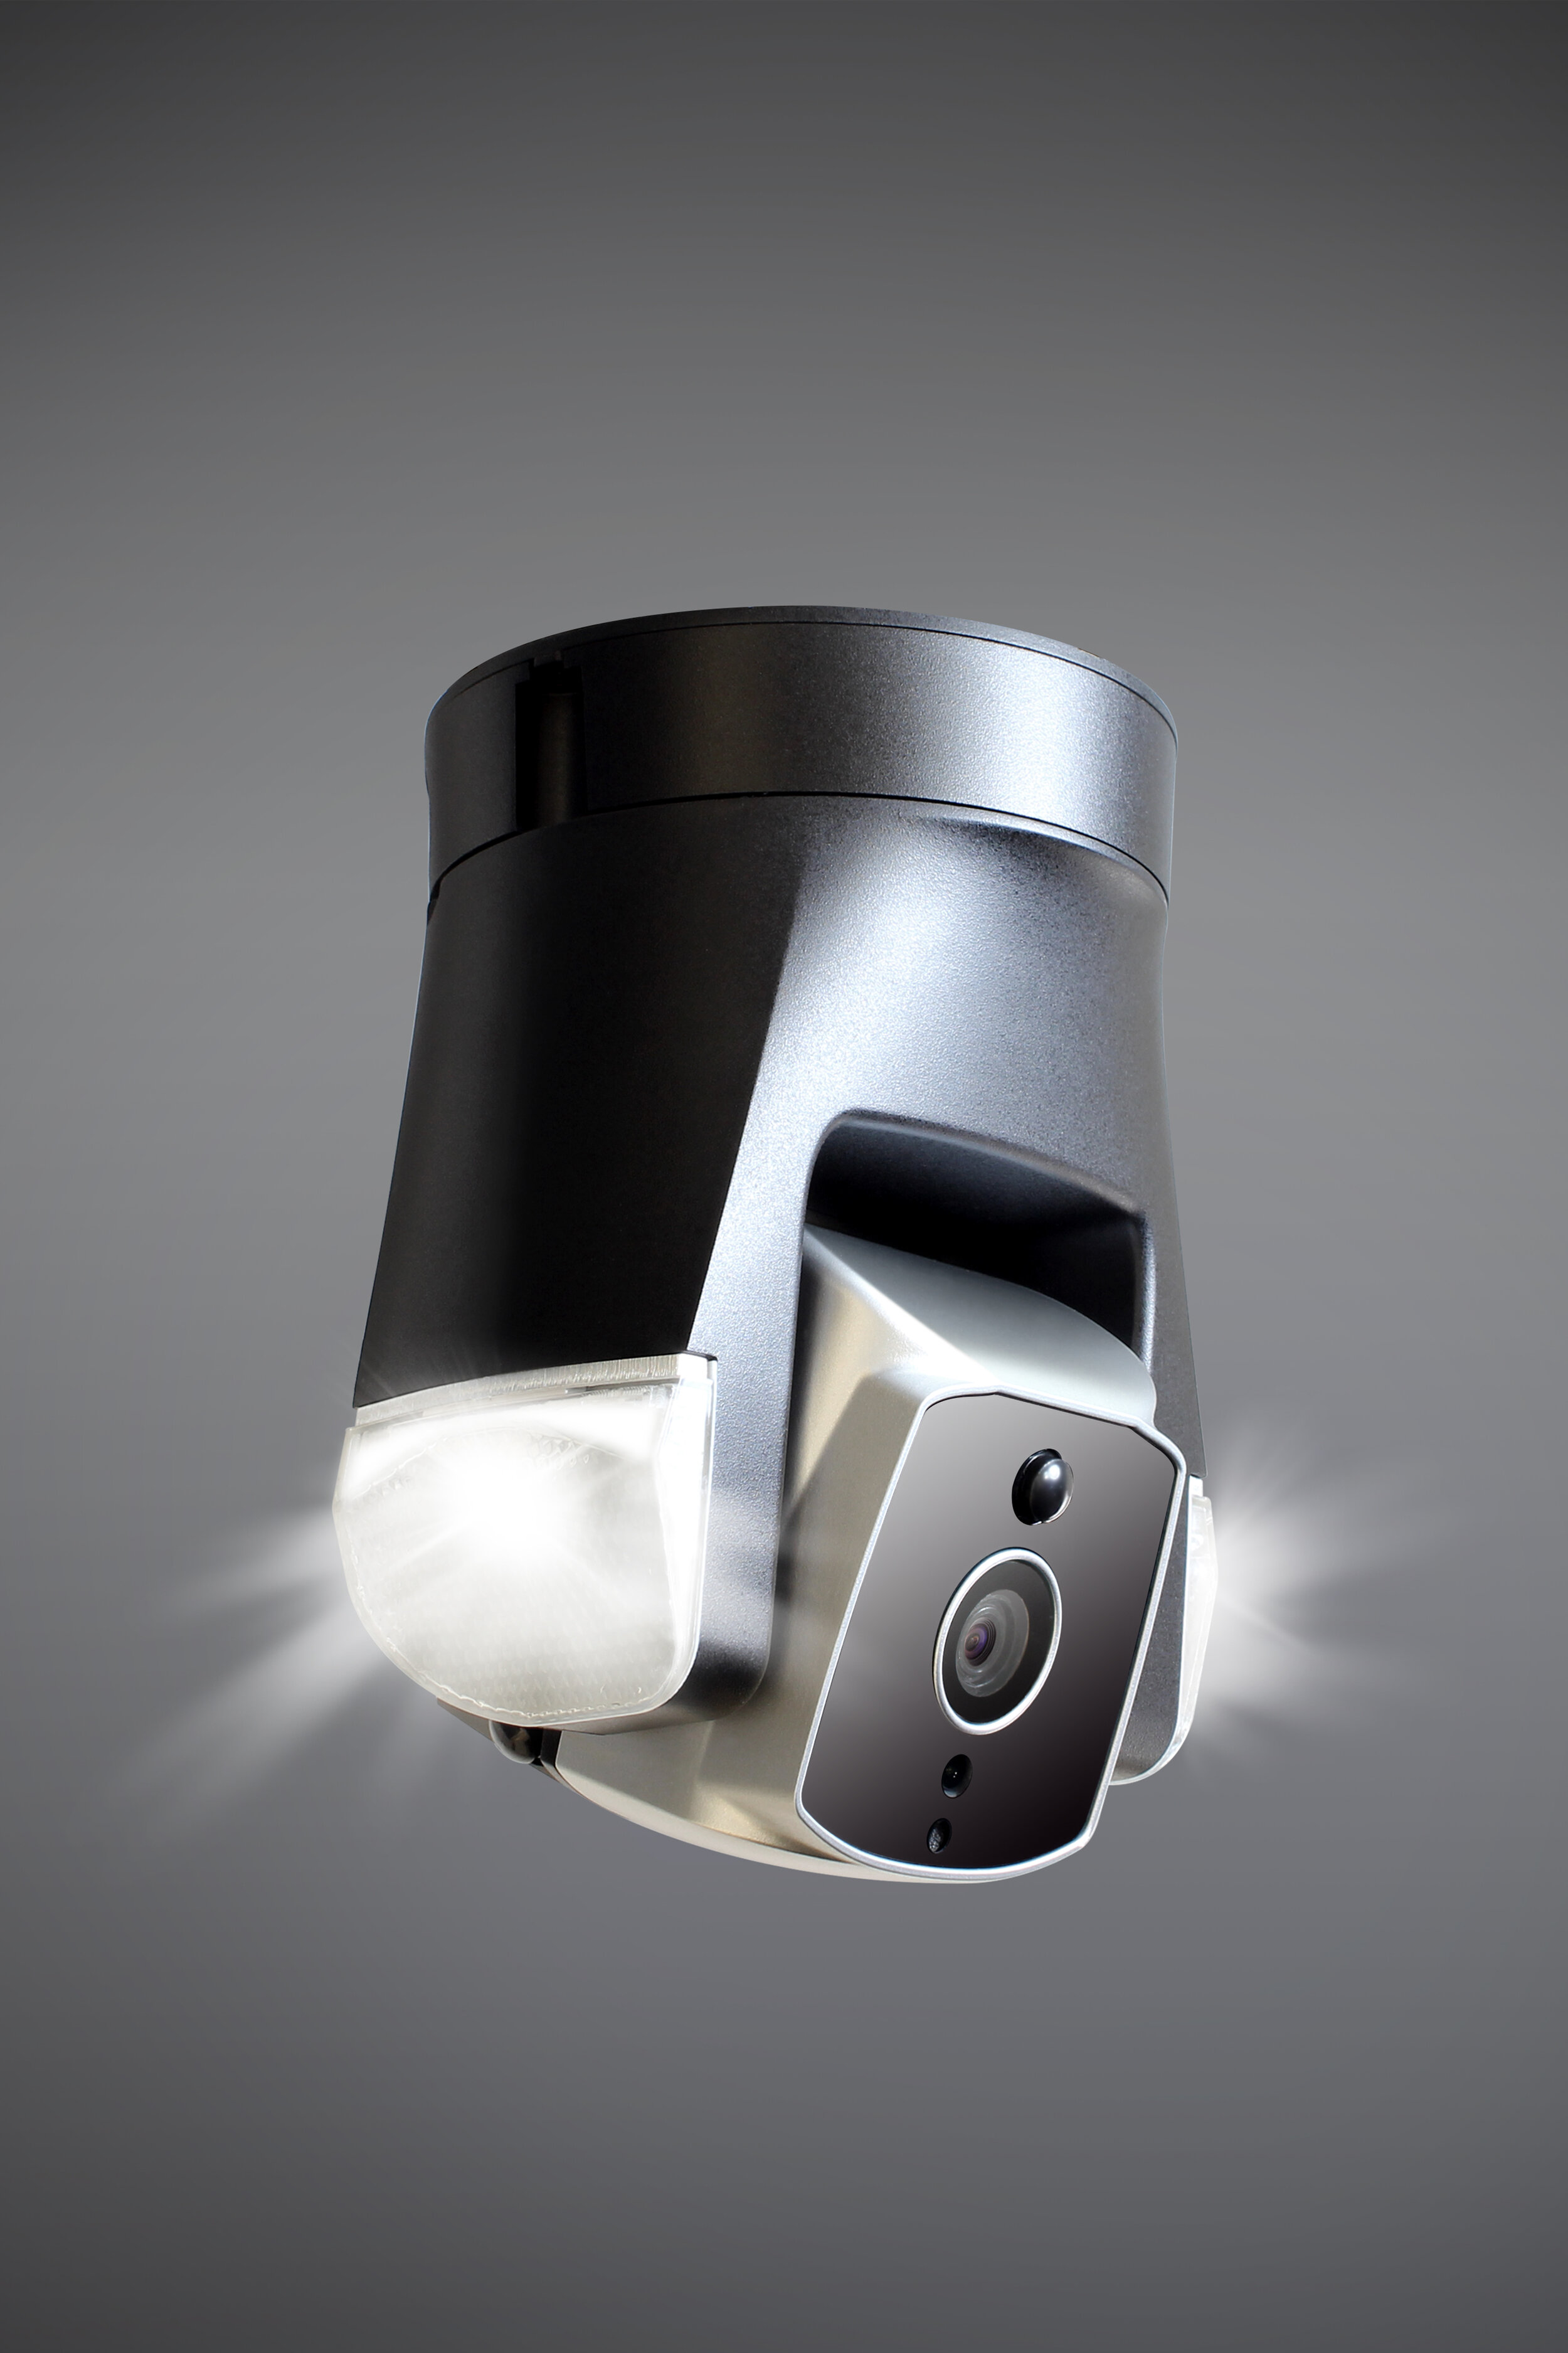 4a - Ares outdoor camera by Amaryllo.jpg